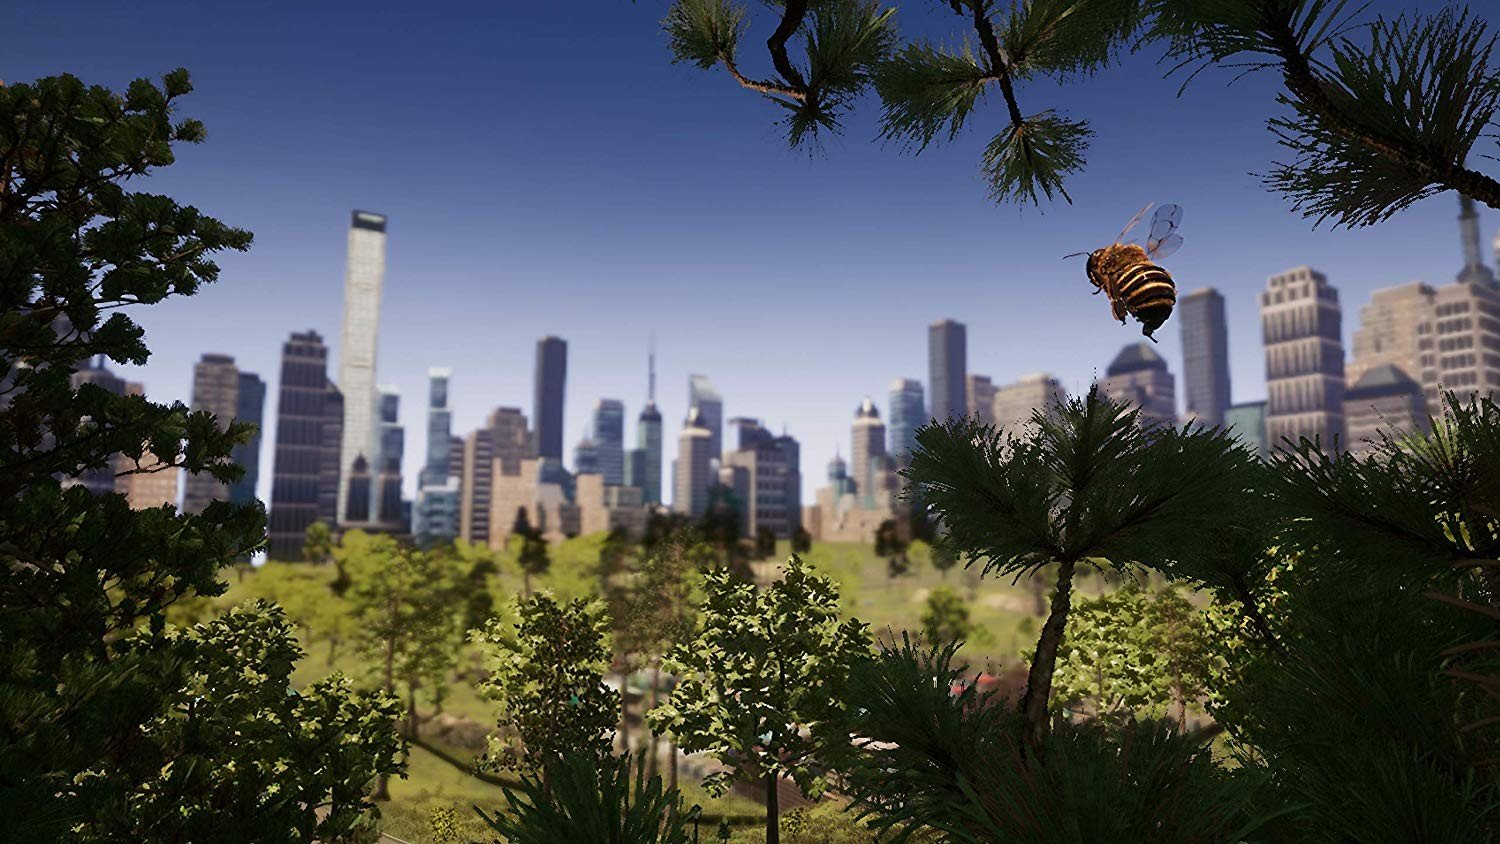 Bee Simulator, switch, nintendo switch,xone, xbox one, ps4, playstation 4, us, north america, eu, europe, release date, gameplay, features, price,pre-order, bigben interactive, varsav game studios